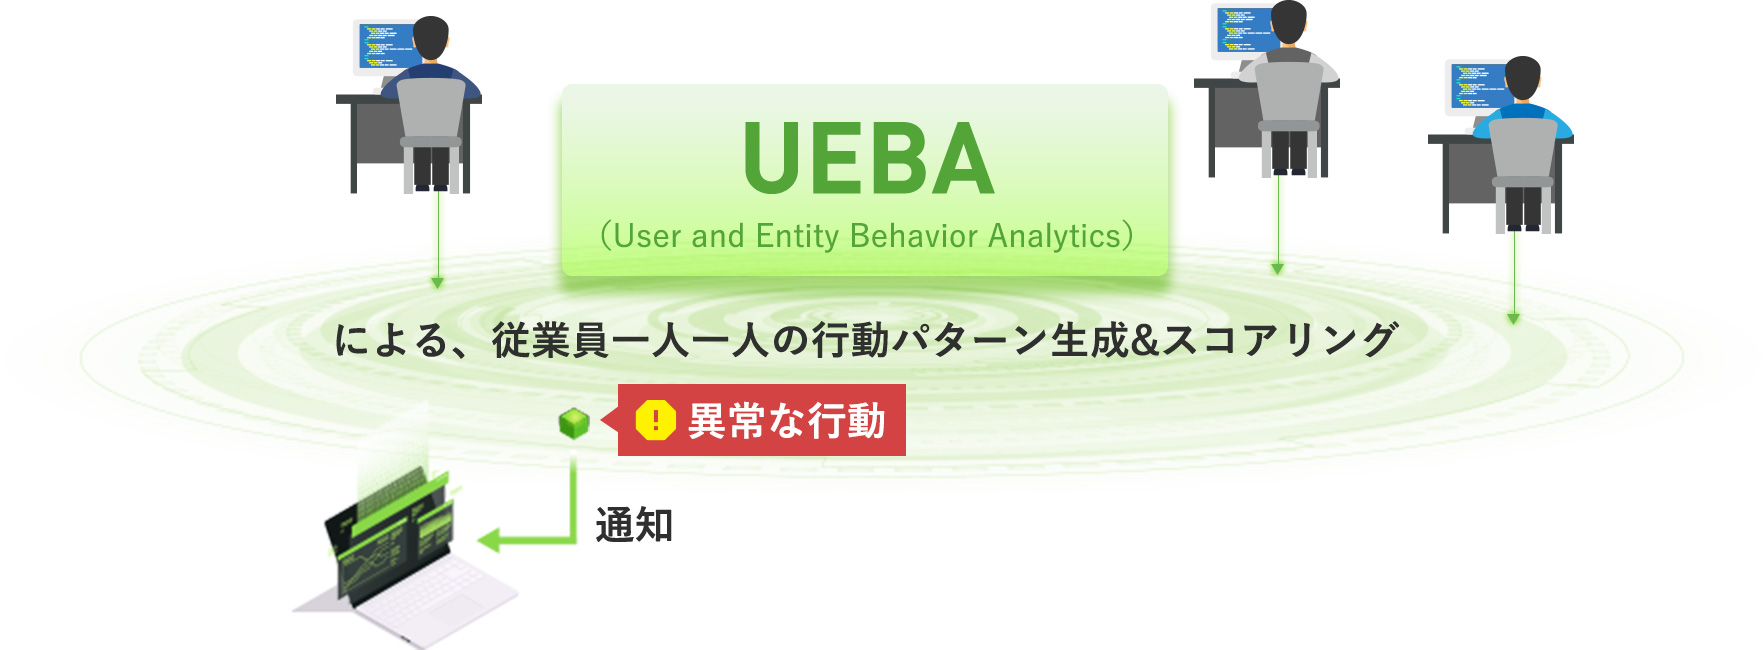 Behavioral pattern generation and scoring for each employee by UEBA (User and Entity Behavior Analytics)